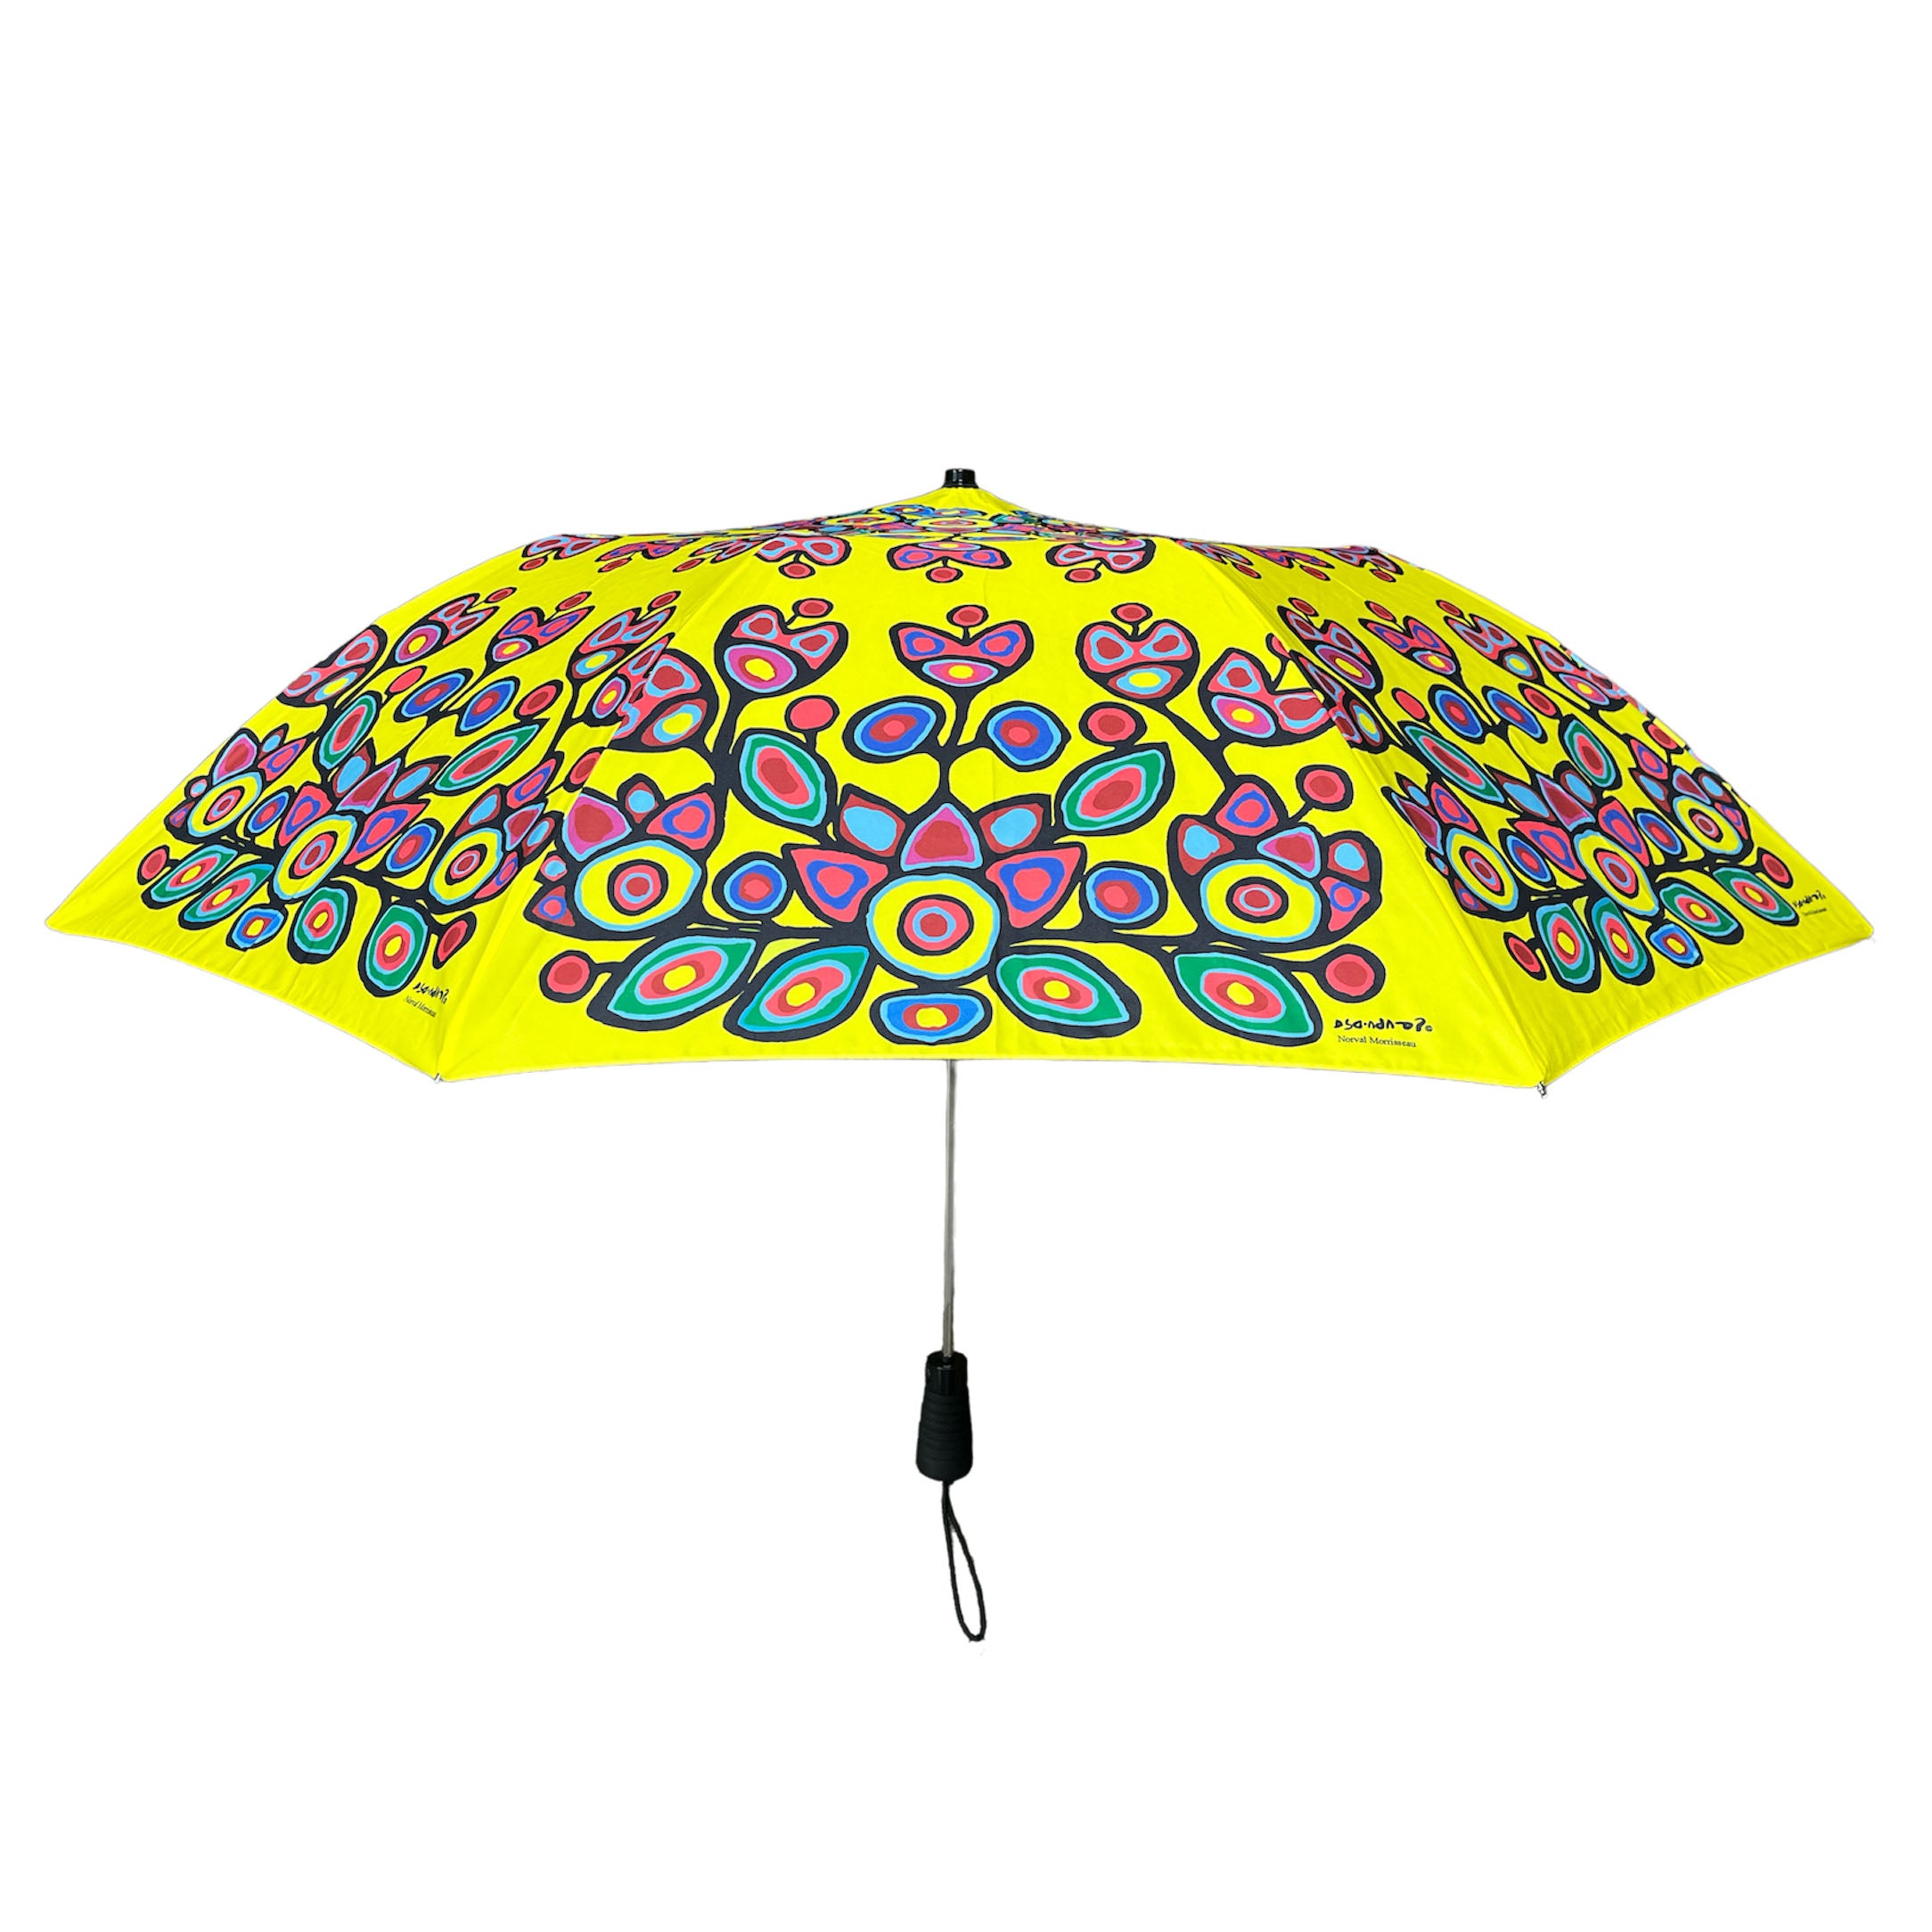 Norval Morrisseau Floral on Yellow Artist Collapsible Umbrella